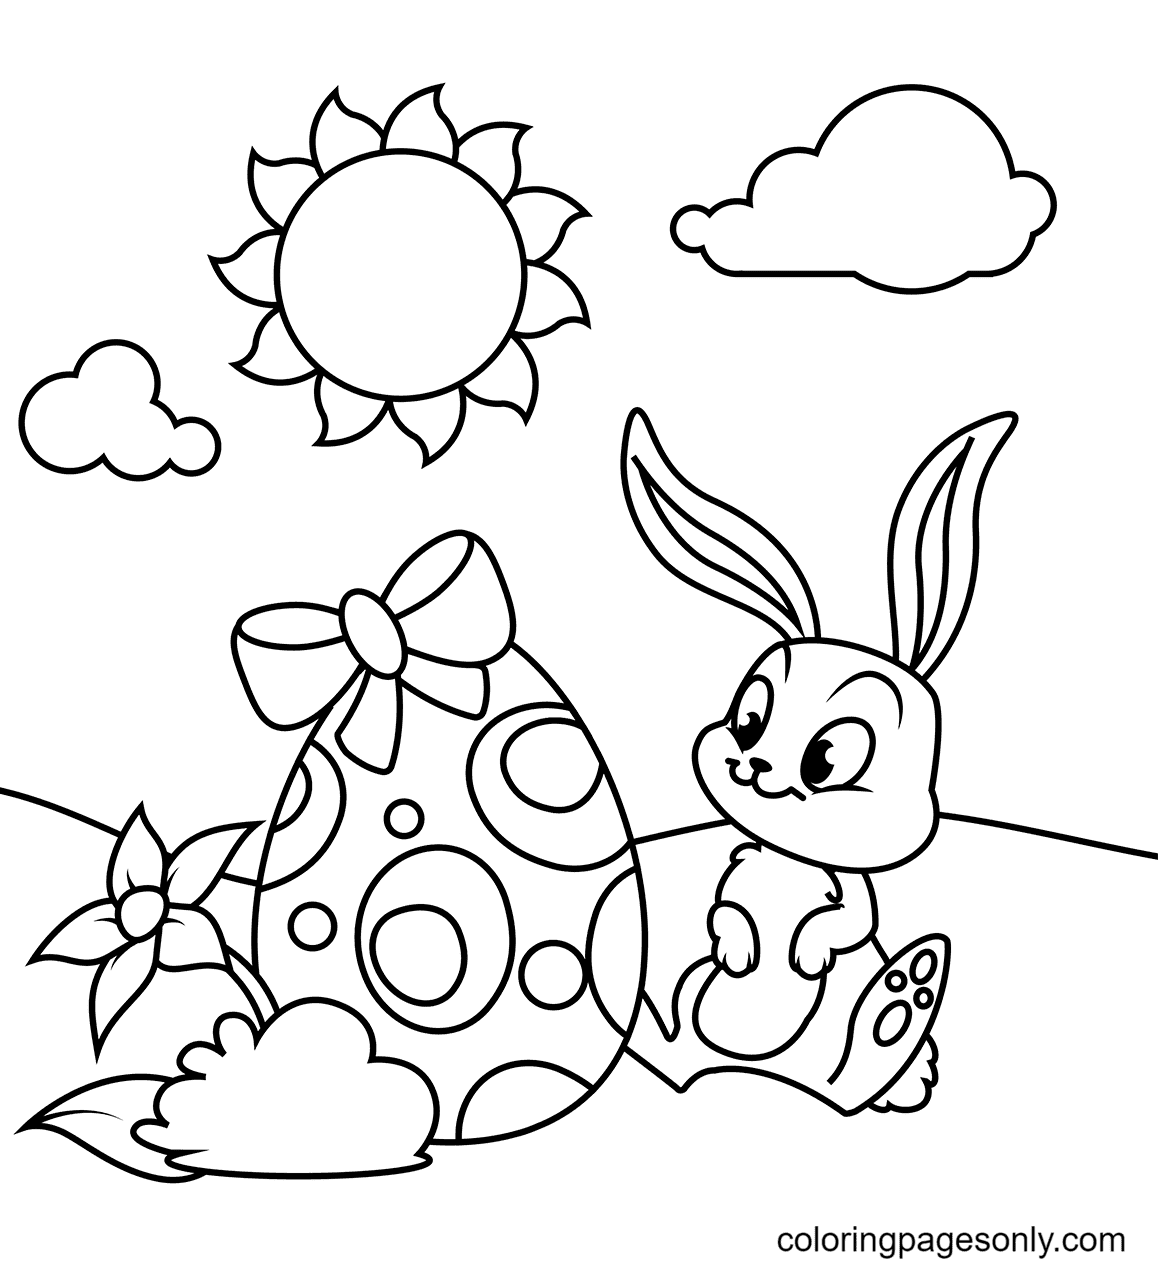 Easter Bunny Coloring Pages Printable for Free Download